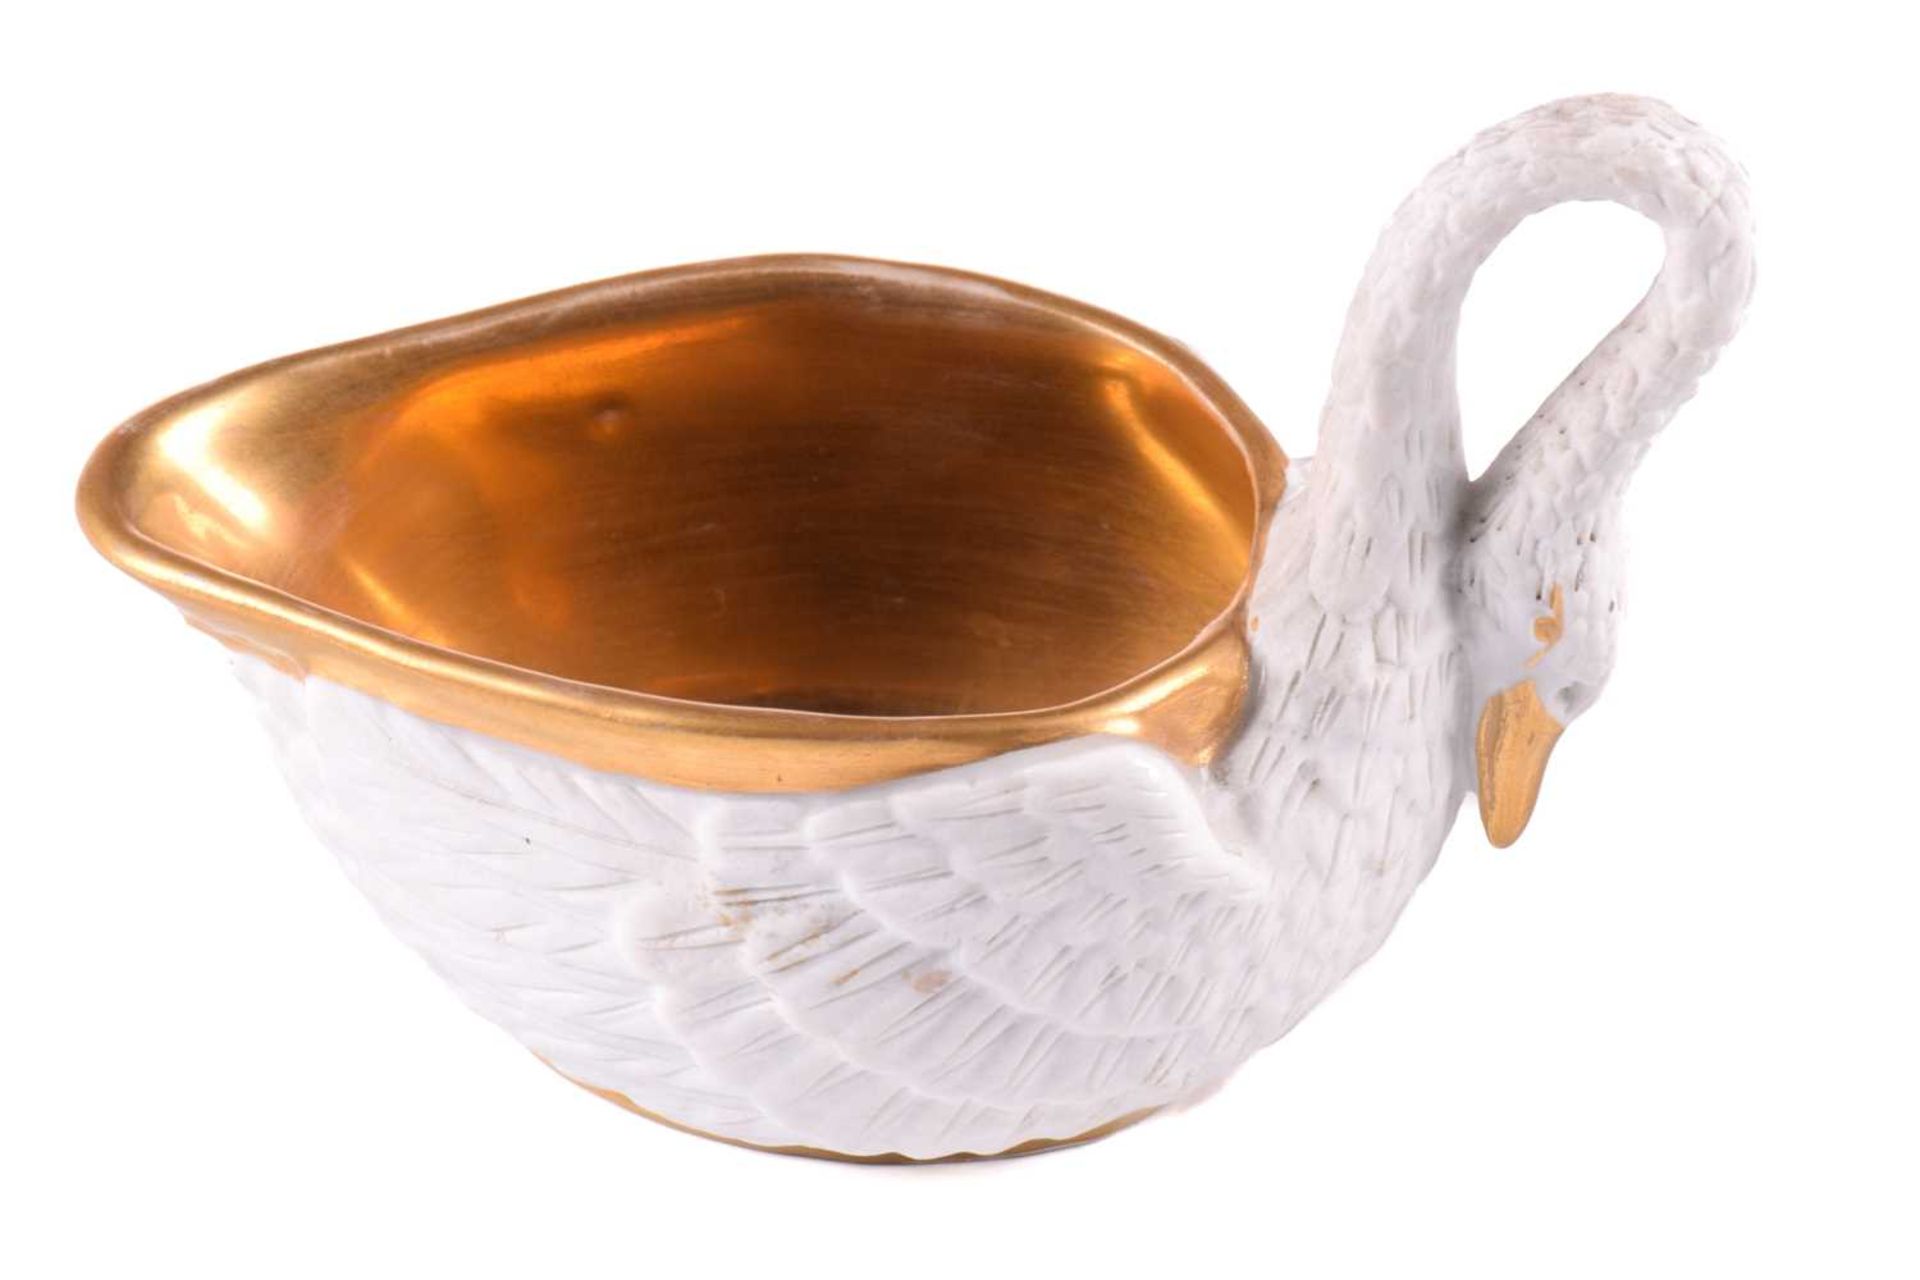 A Vienna bisque porcelain swan sauce boat early 20th century, with a gilded interior, based on an - Bild 3 aus 21